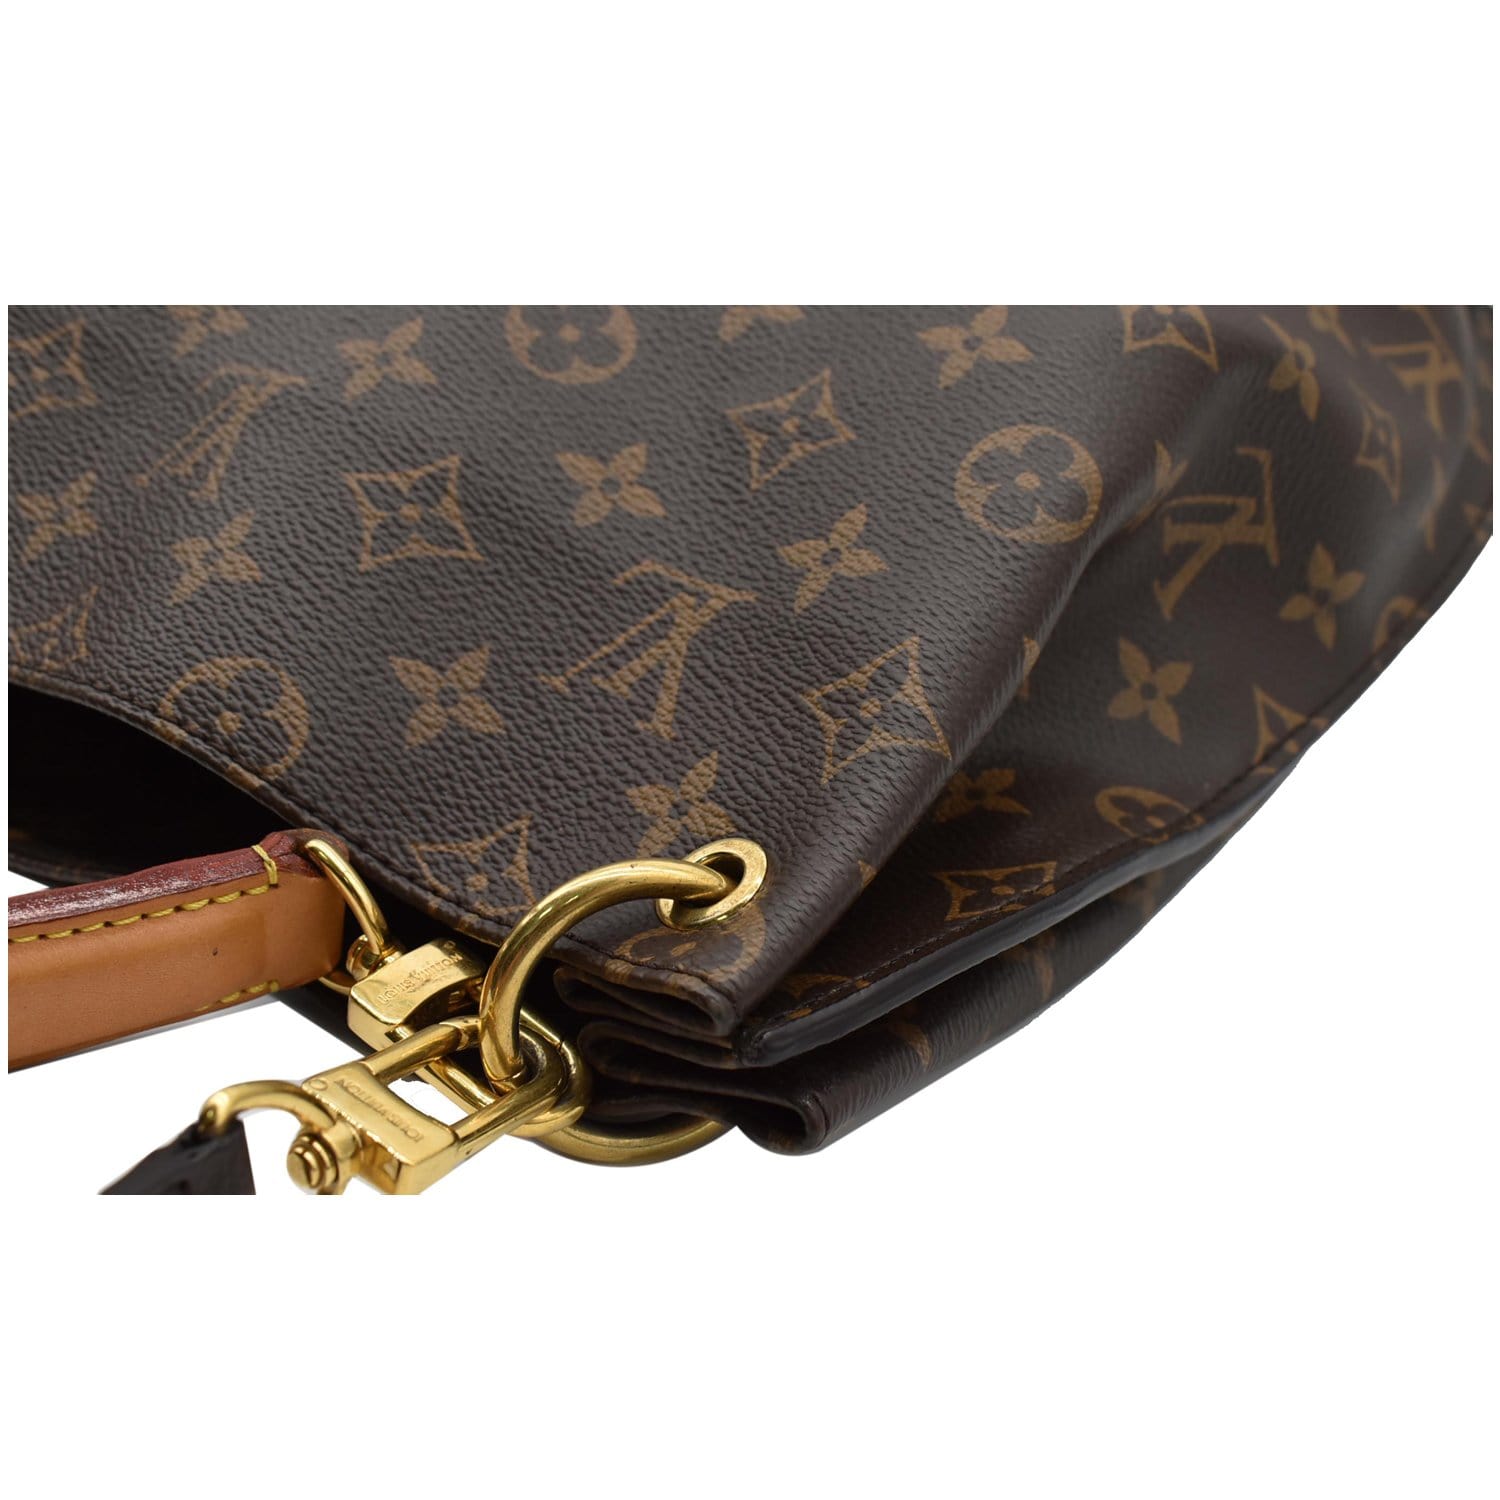 Ace Essentials - Price: ₦18,000 Brand: lv metis hobo Color: Size: big  --------------- 👇HOW TO ORDER👇 ---------------- ❤️: PAY ONLY TO COMPANY  ACCOUNT ---------------- ❤️: ACE ESSENTIALS ❤️: 010146